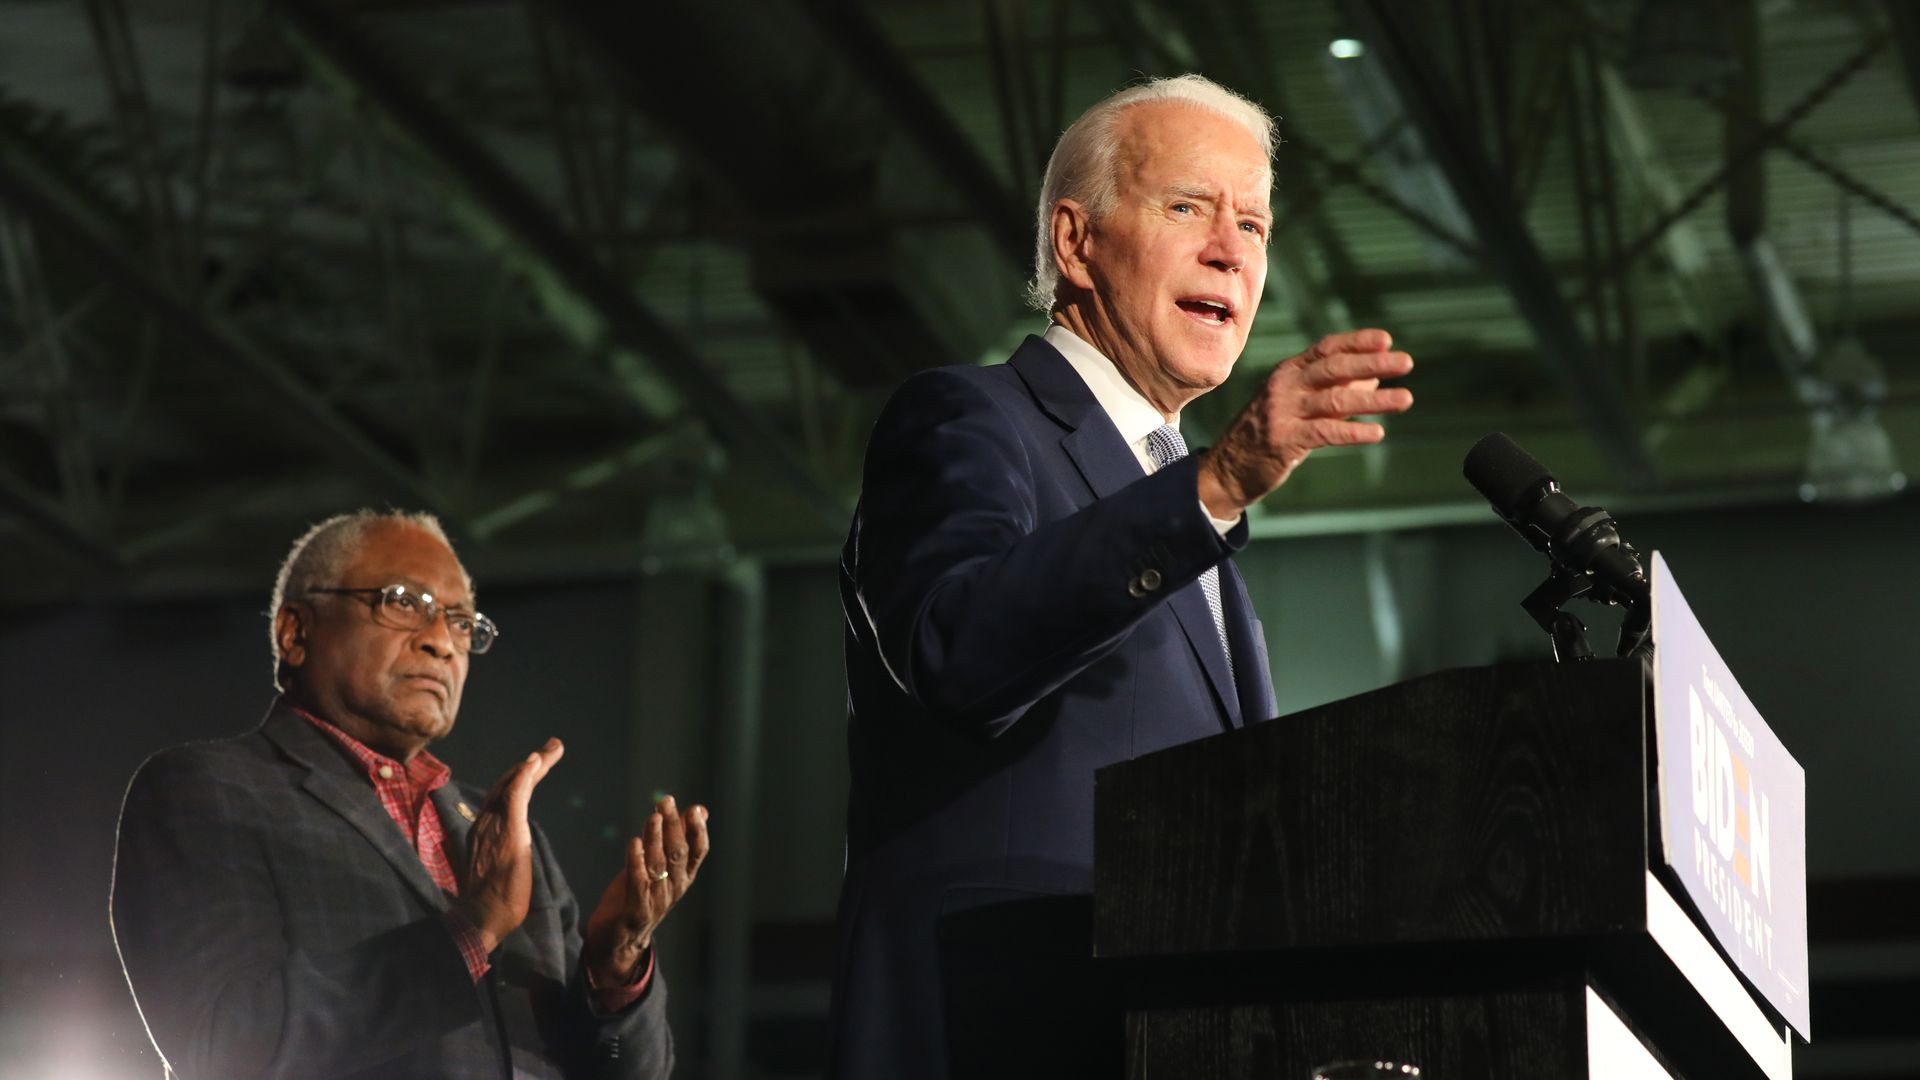 COLUJoe Biden, with Rep. Jim Clyburn (D-S.C.), speaks in Columbia, S.C. after declaring victory in the state's Democratic primary on Feb. 29, 2020.